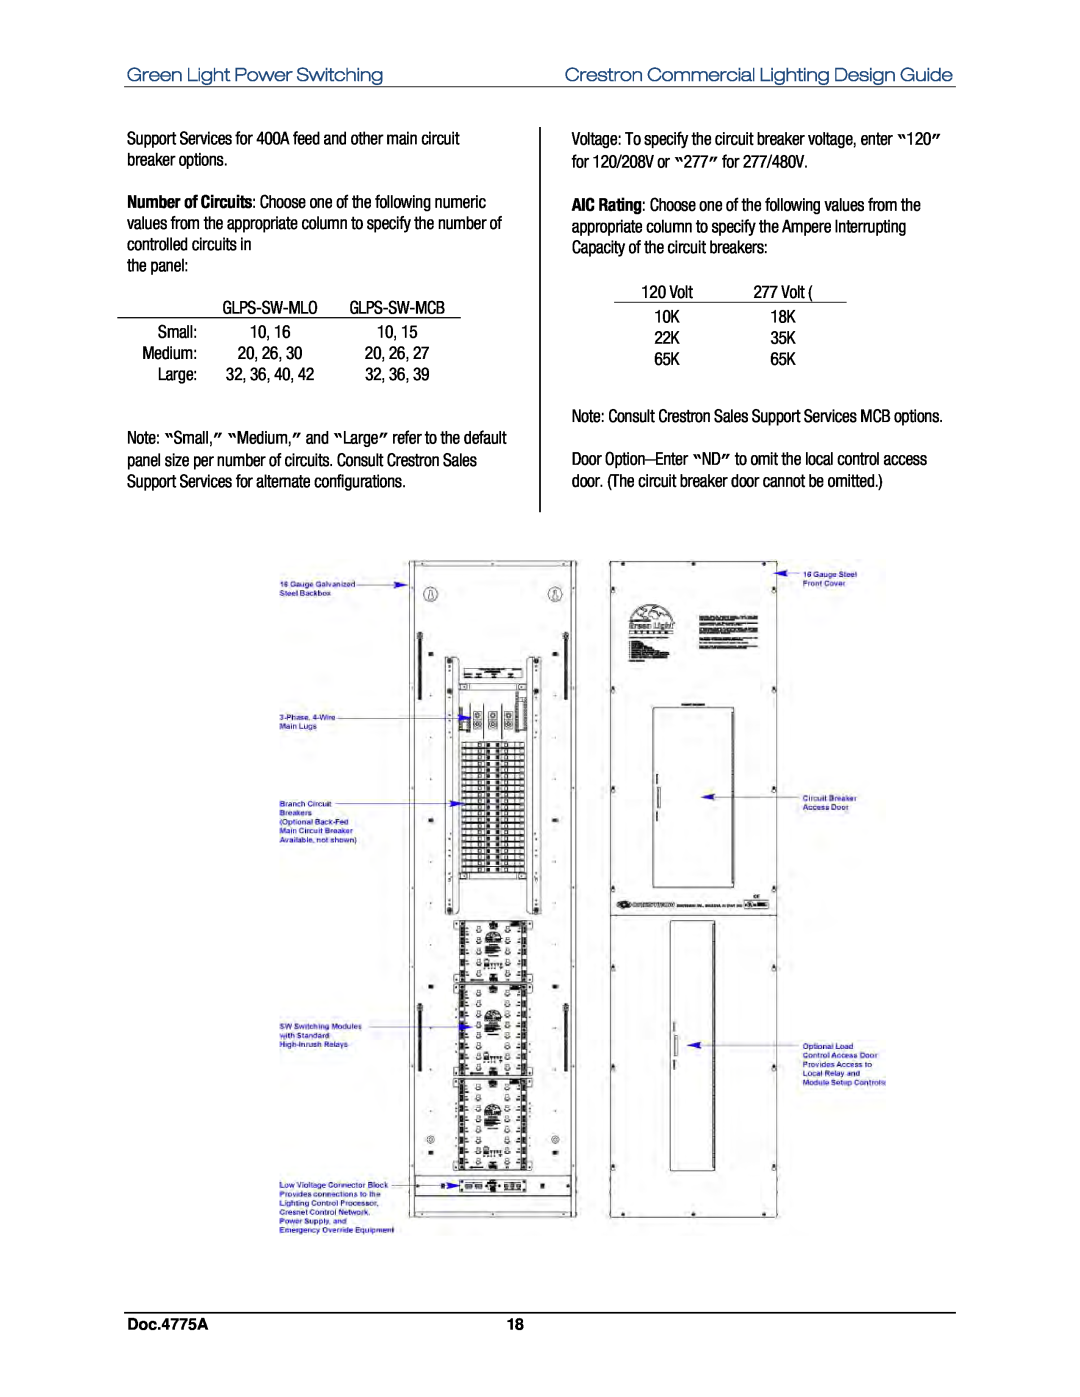 Crestron electronic GLPS-HDSW-FT Green Light Power Switching, Crestron Commercial Lighting Design Guide, the panel, Small 